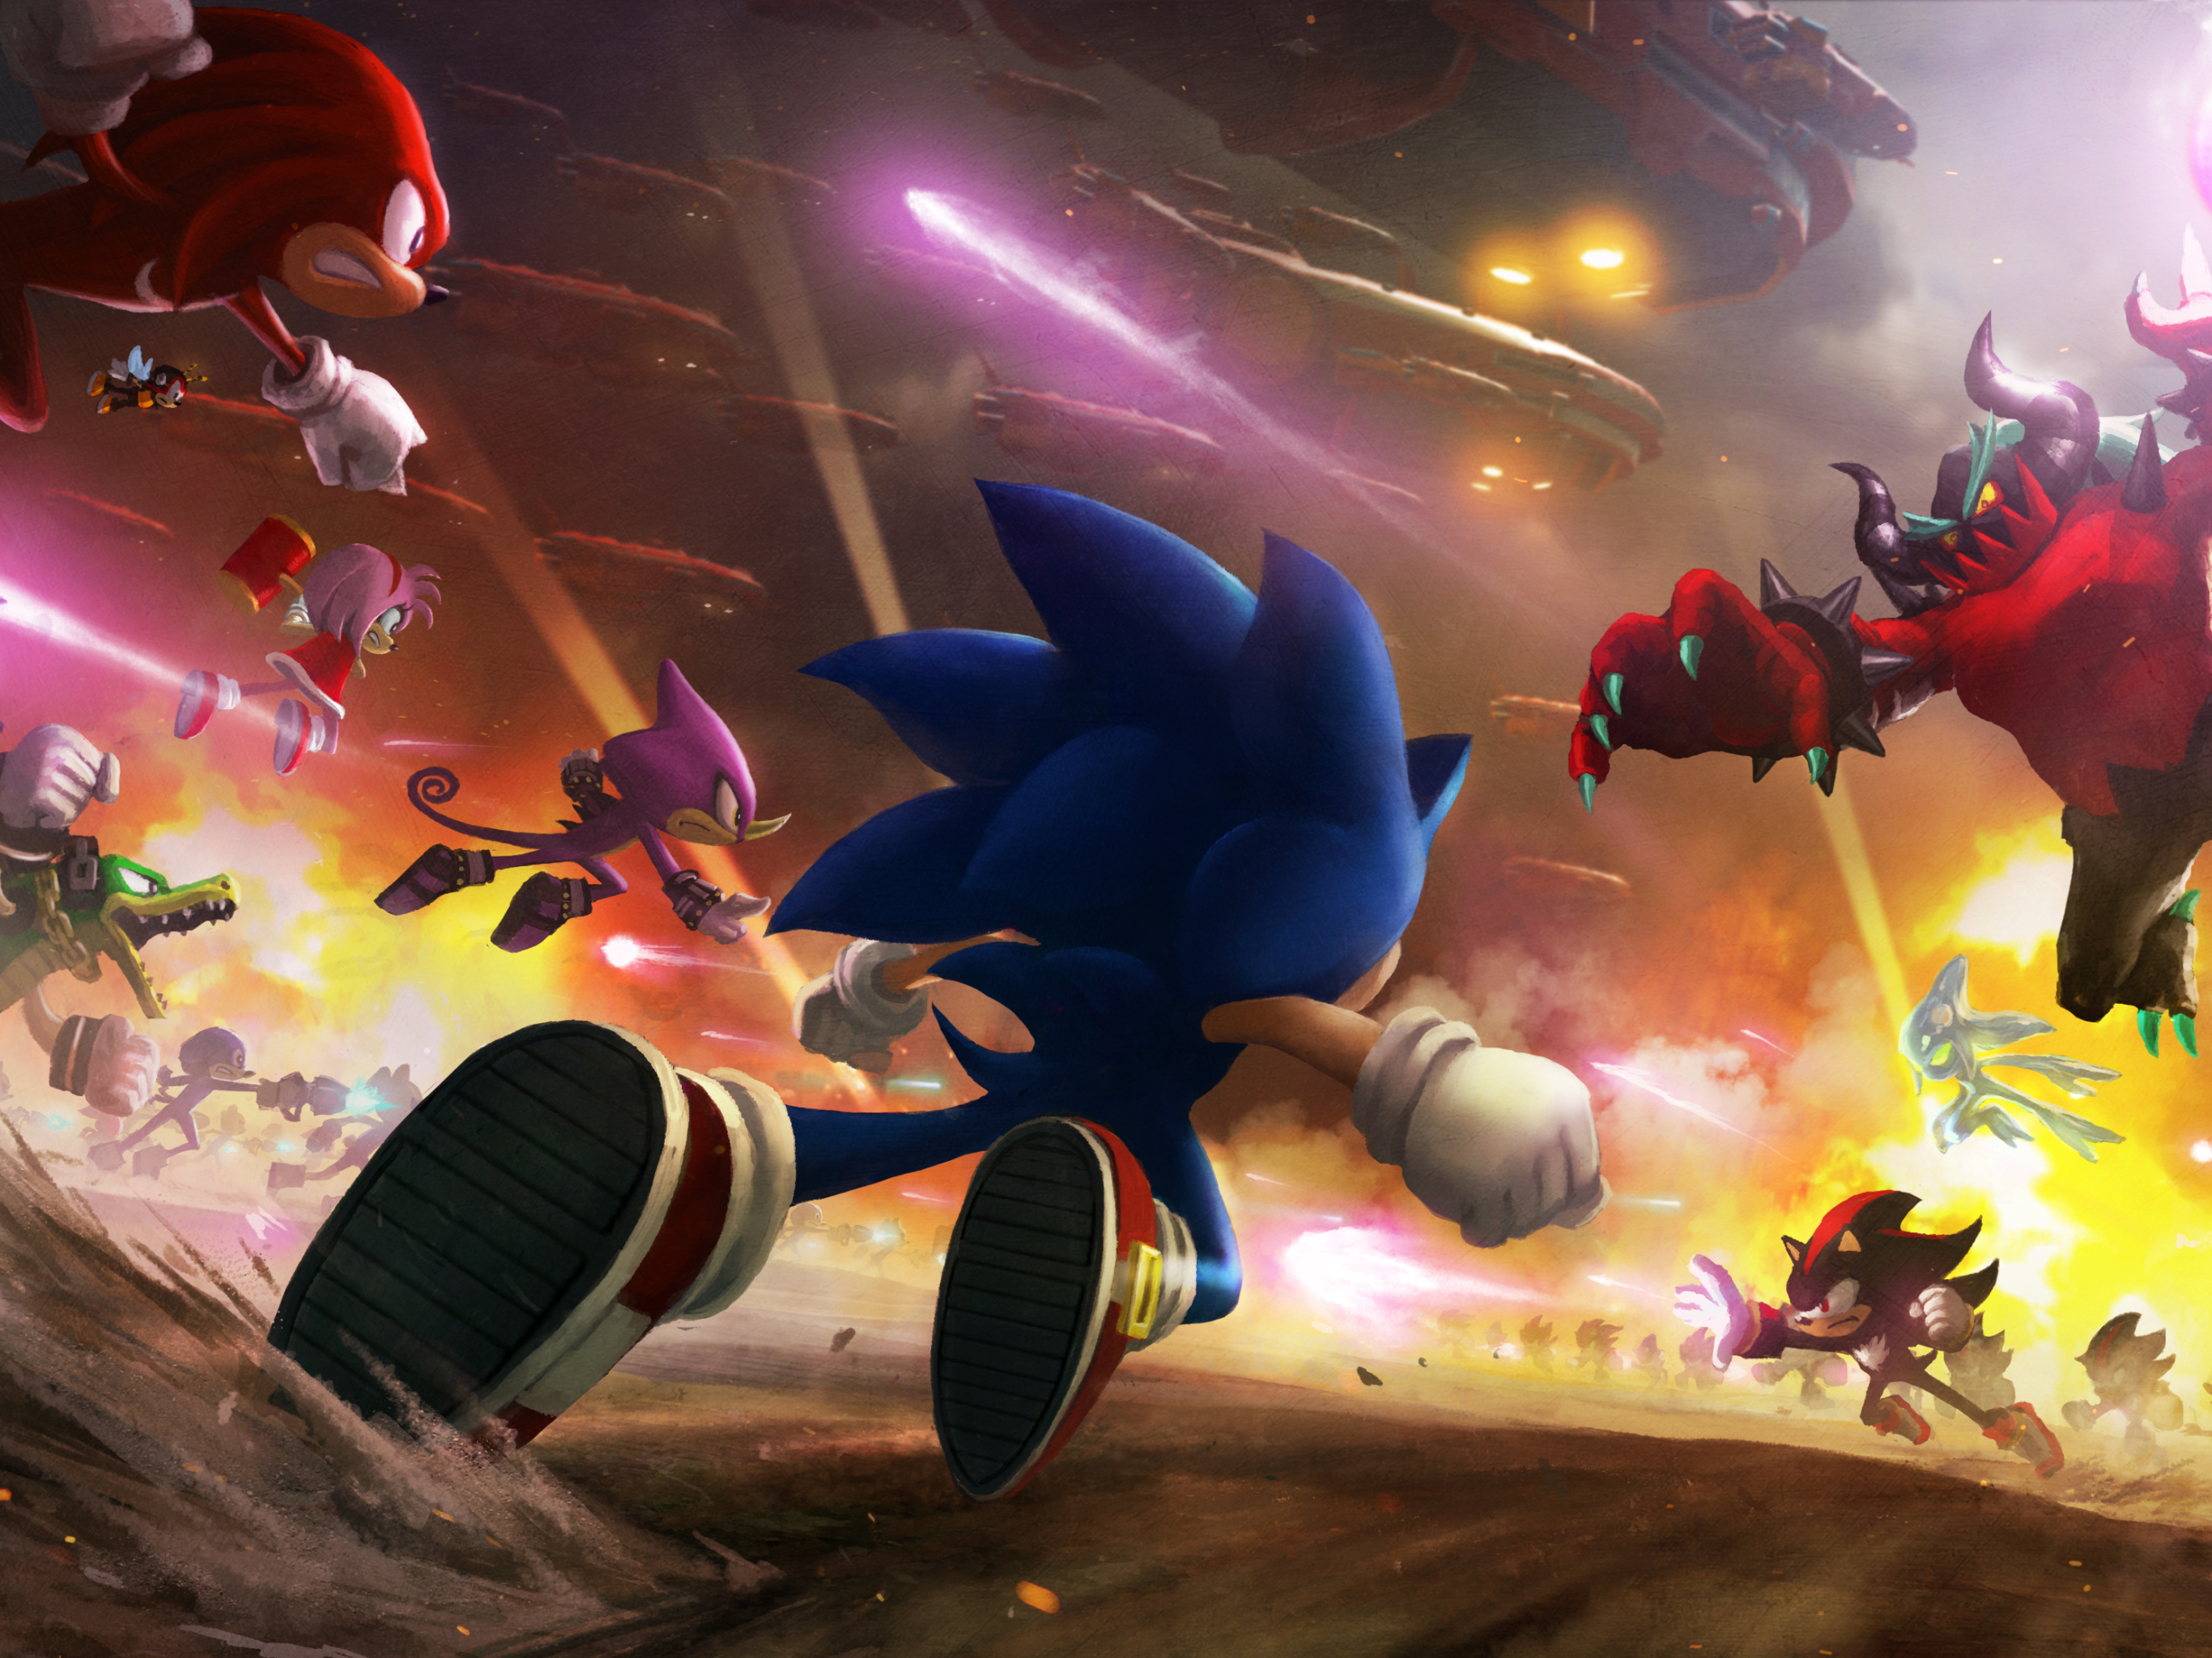 video game, sonic forces, sonic the hedgehog, shadow the hedgehog, metal sonic, knuckles the echidna, amy rose, vector the crocodile, espio the chameleon, charmy bee, silver the hedgehog, chaos (sonic the hedgehog), zavok (sonic the hedgehog), sonic